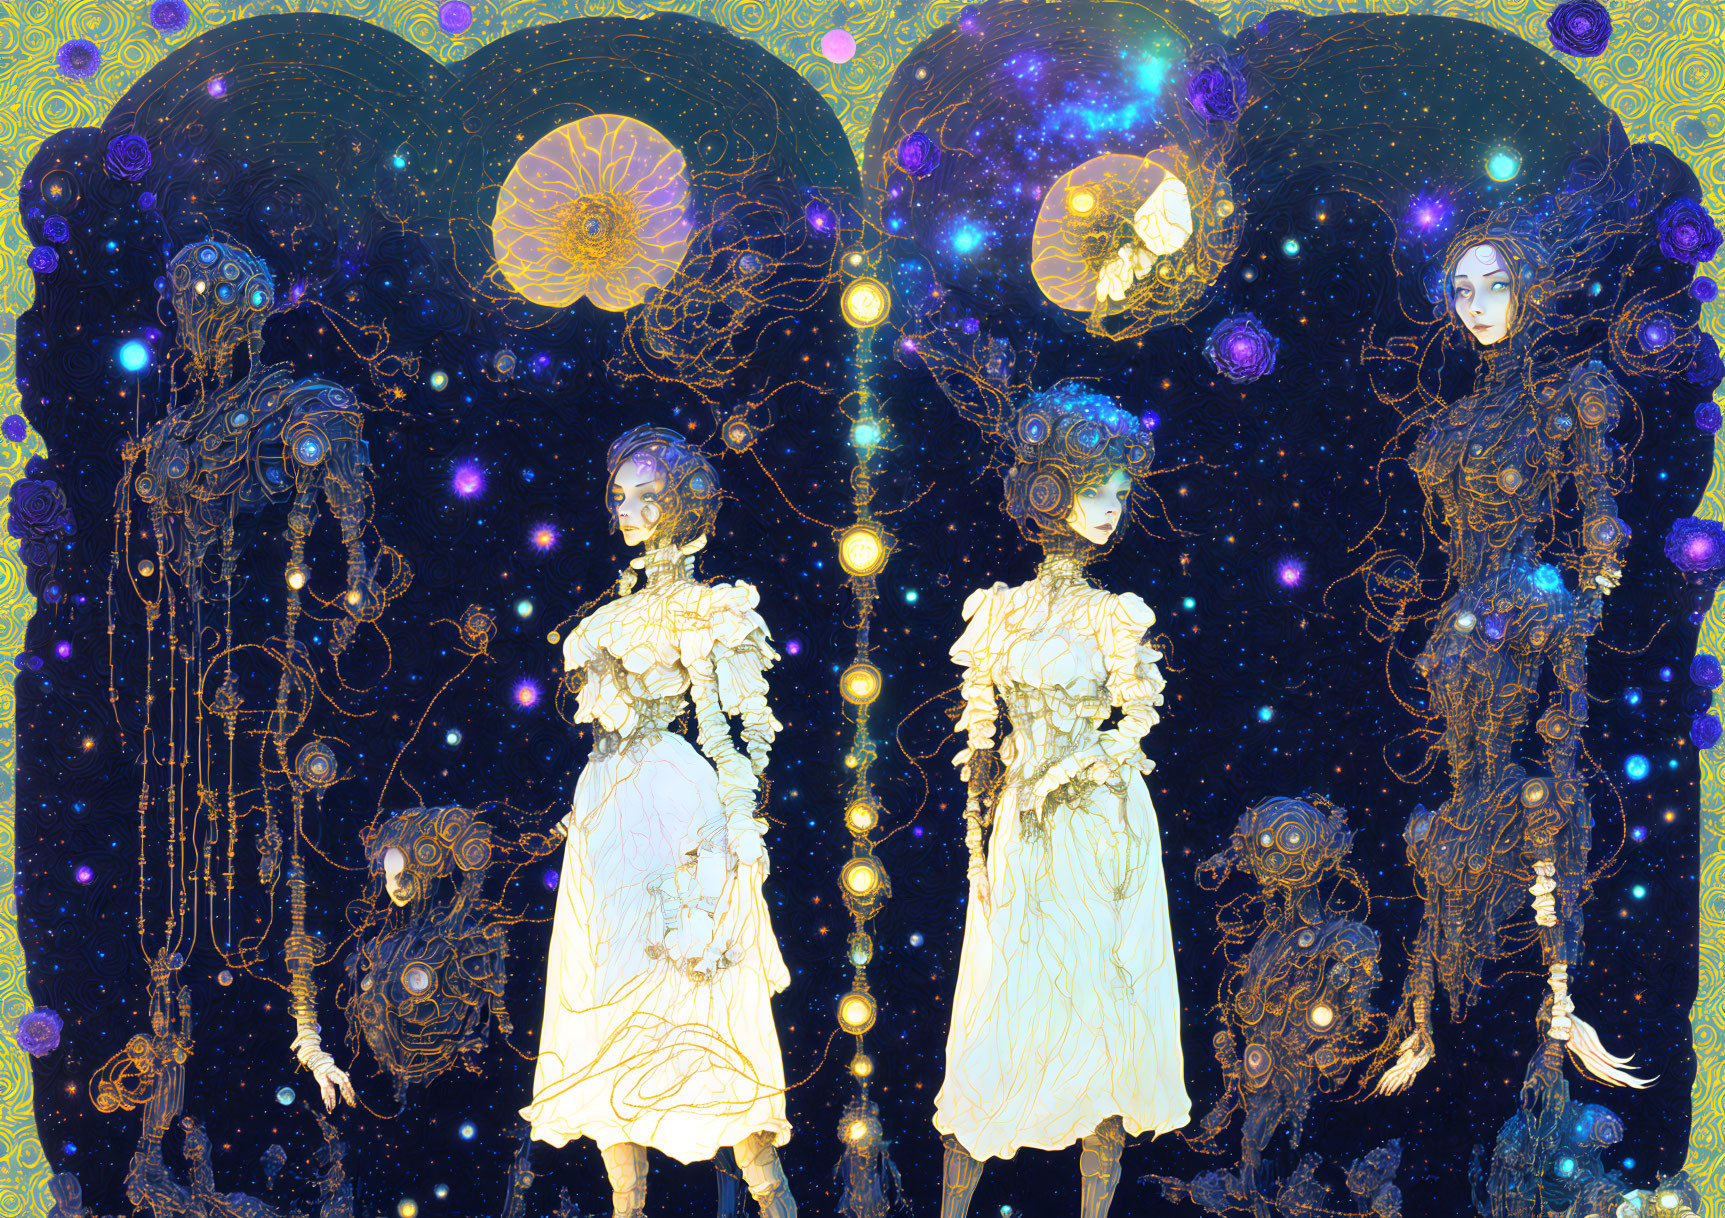 Ethereal figures with cosmic hairstyles in vibrant starry scene